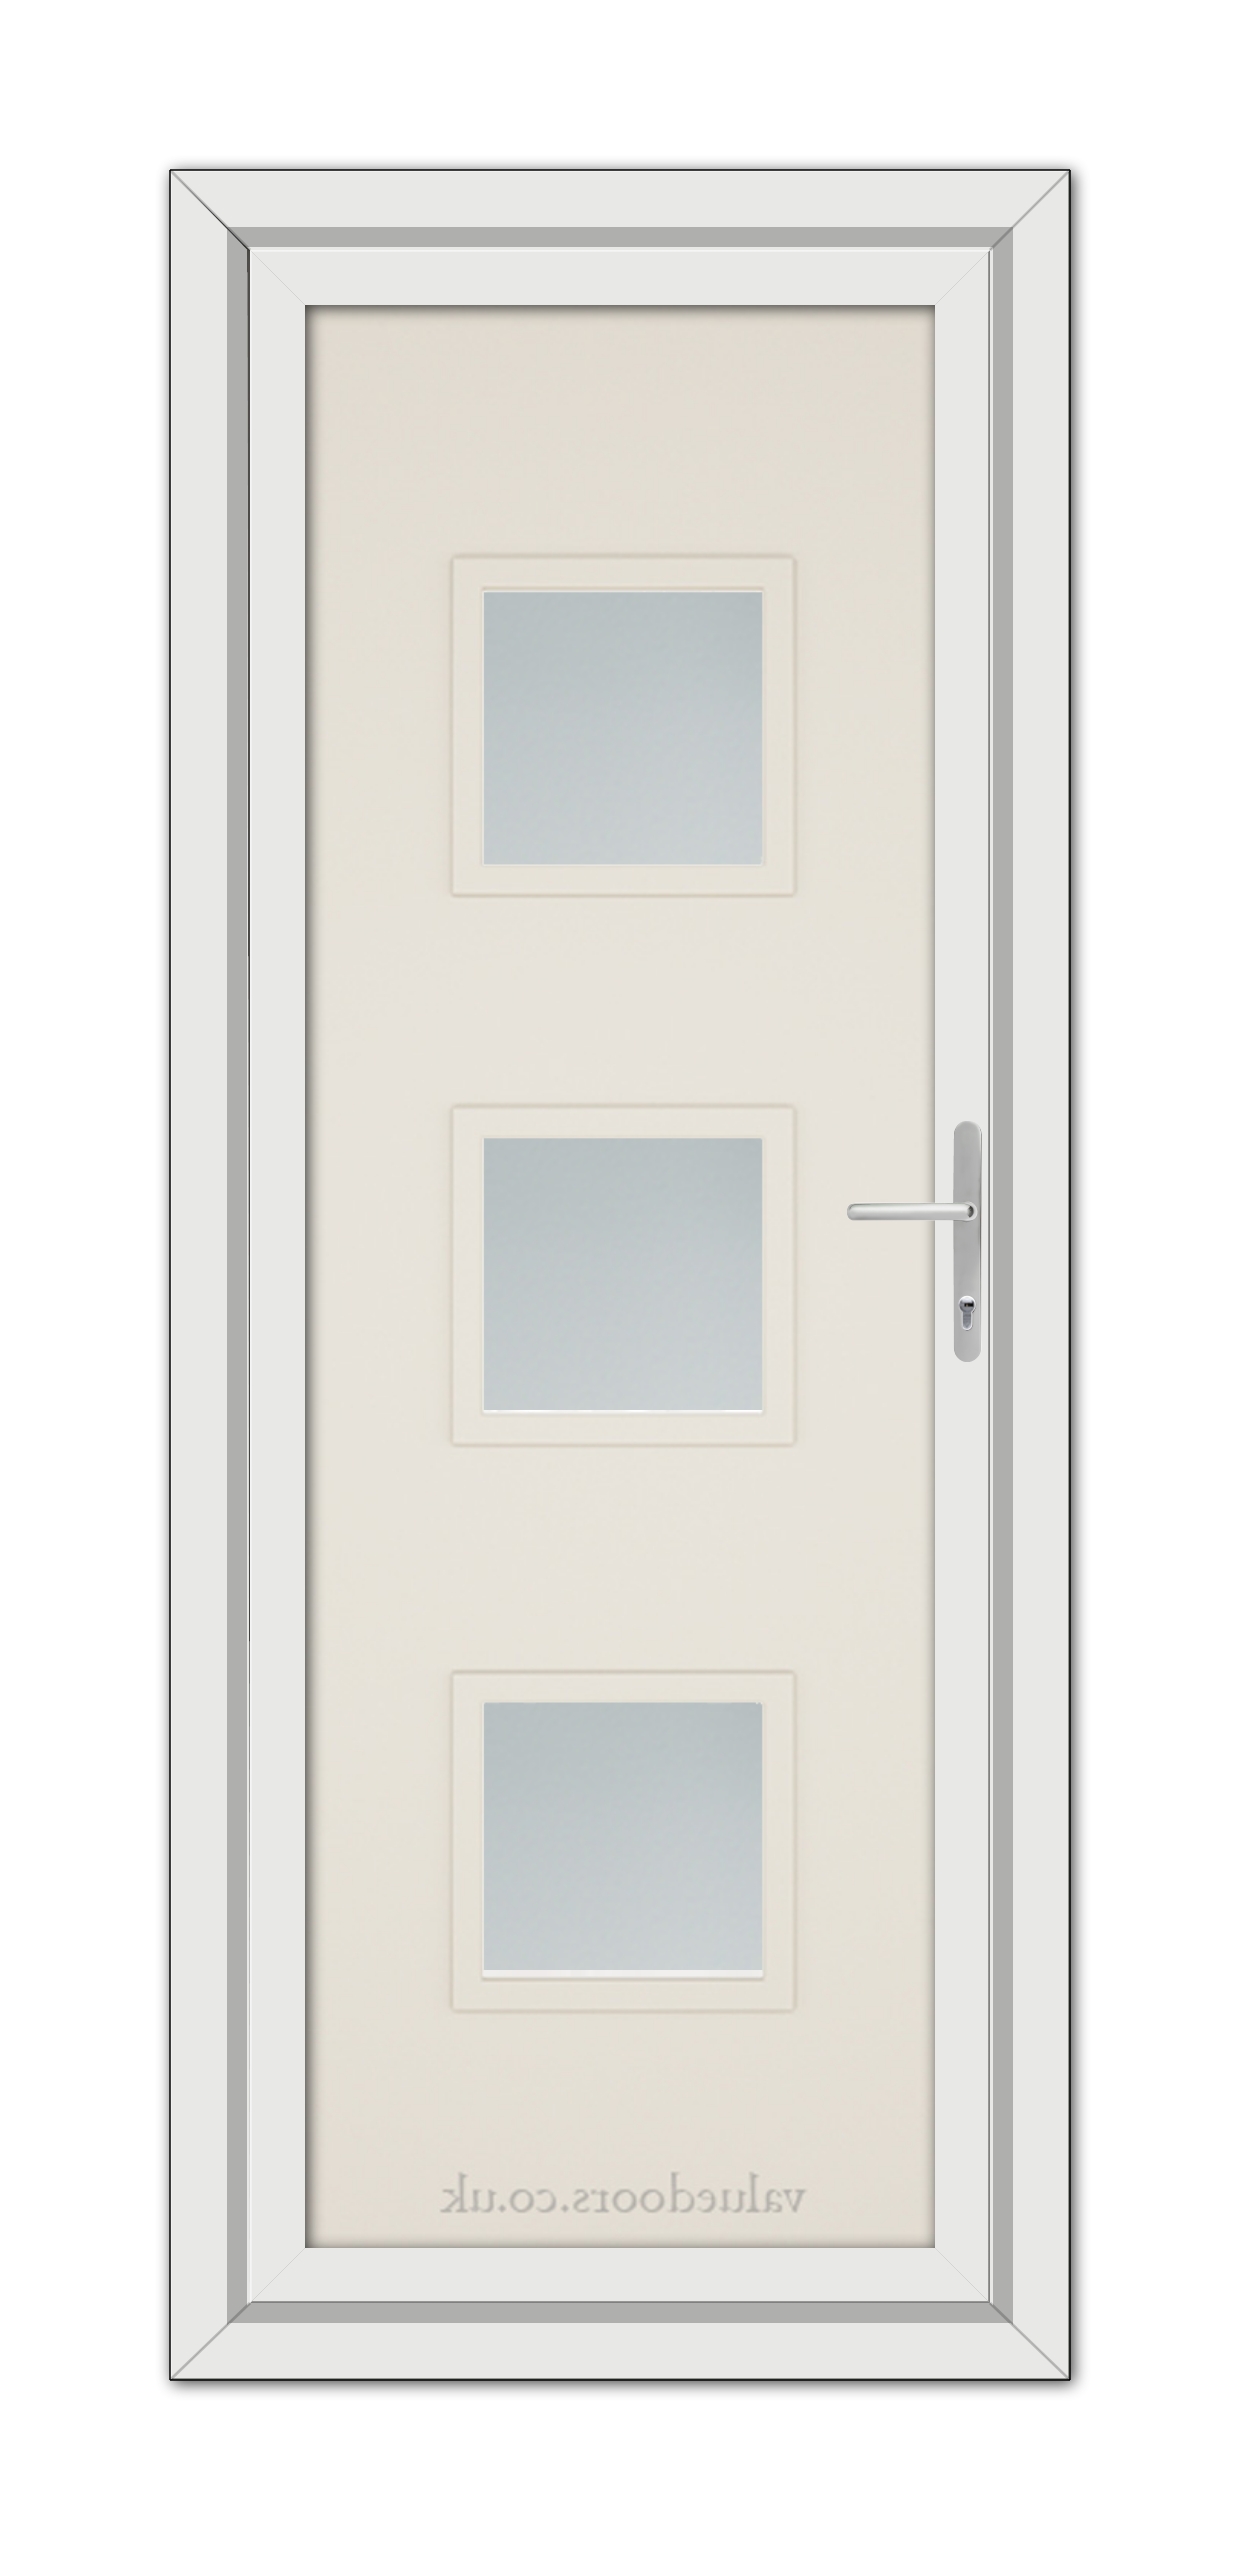 A Cream Modern 5013 uPVC Door with three frosted glass panels and a silver handle, set within a grey frame, viewable from the front.